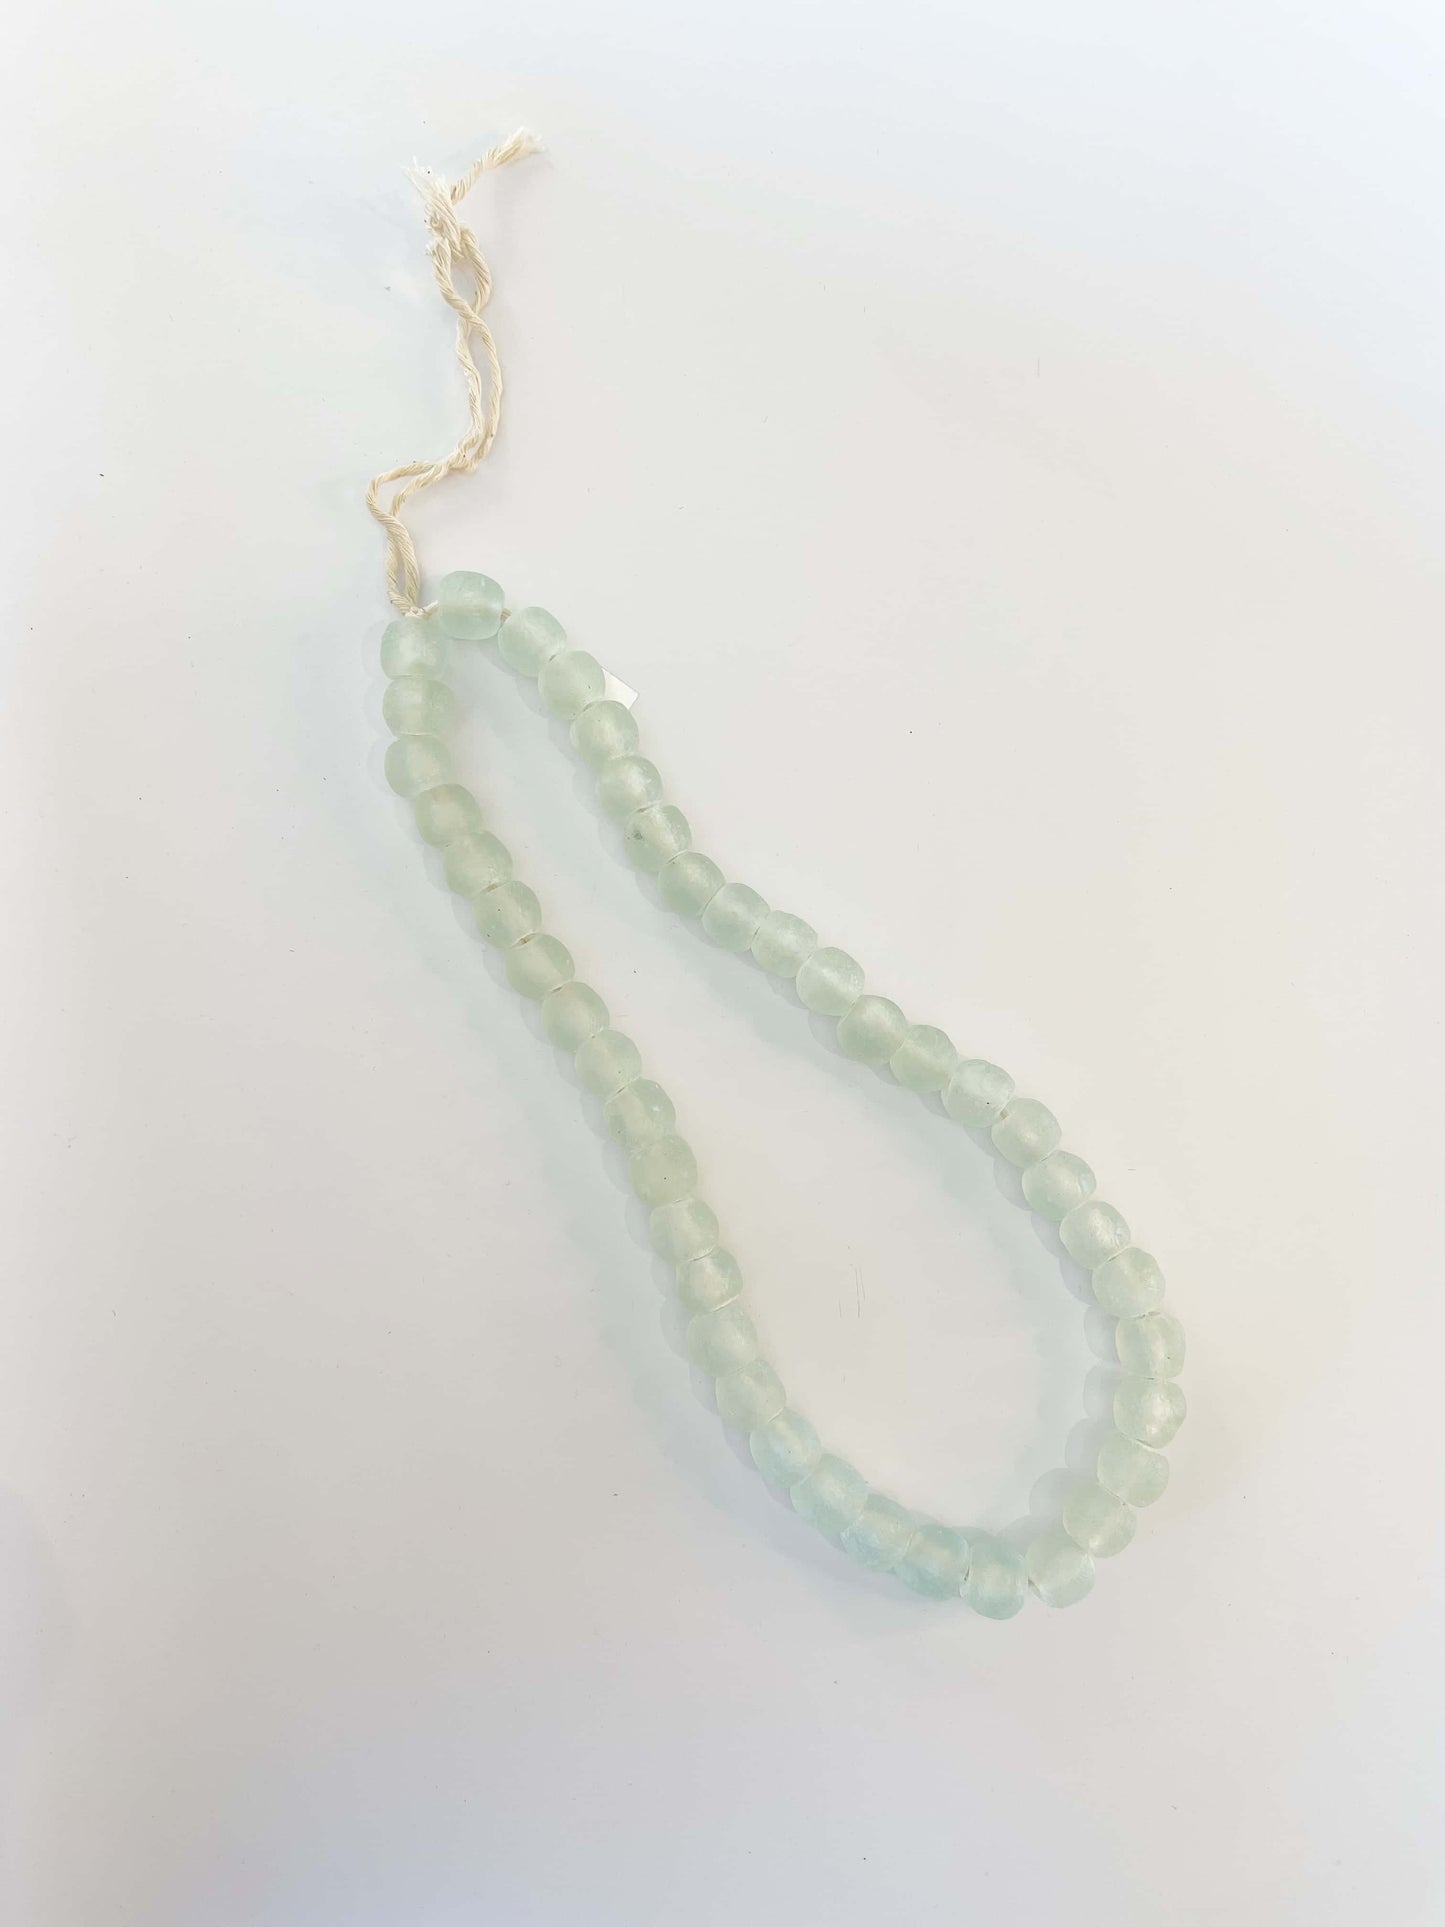 Recycled glass beads in sea green